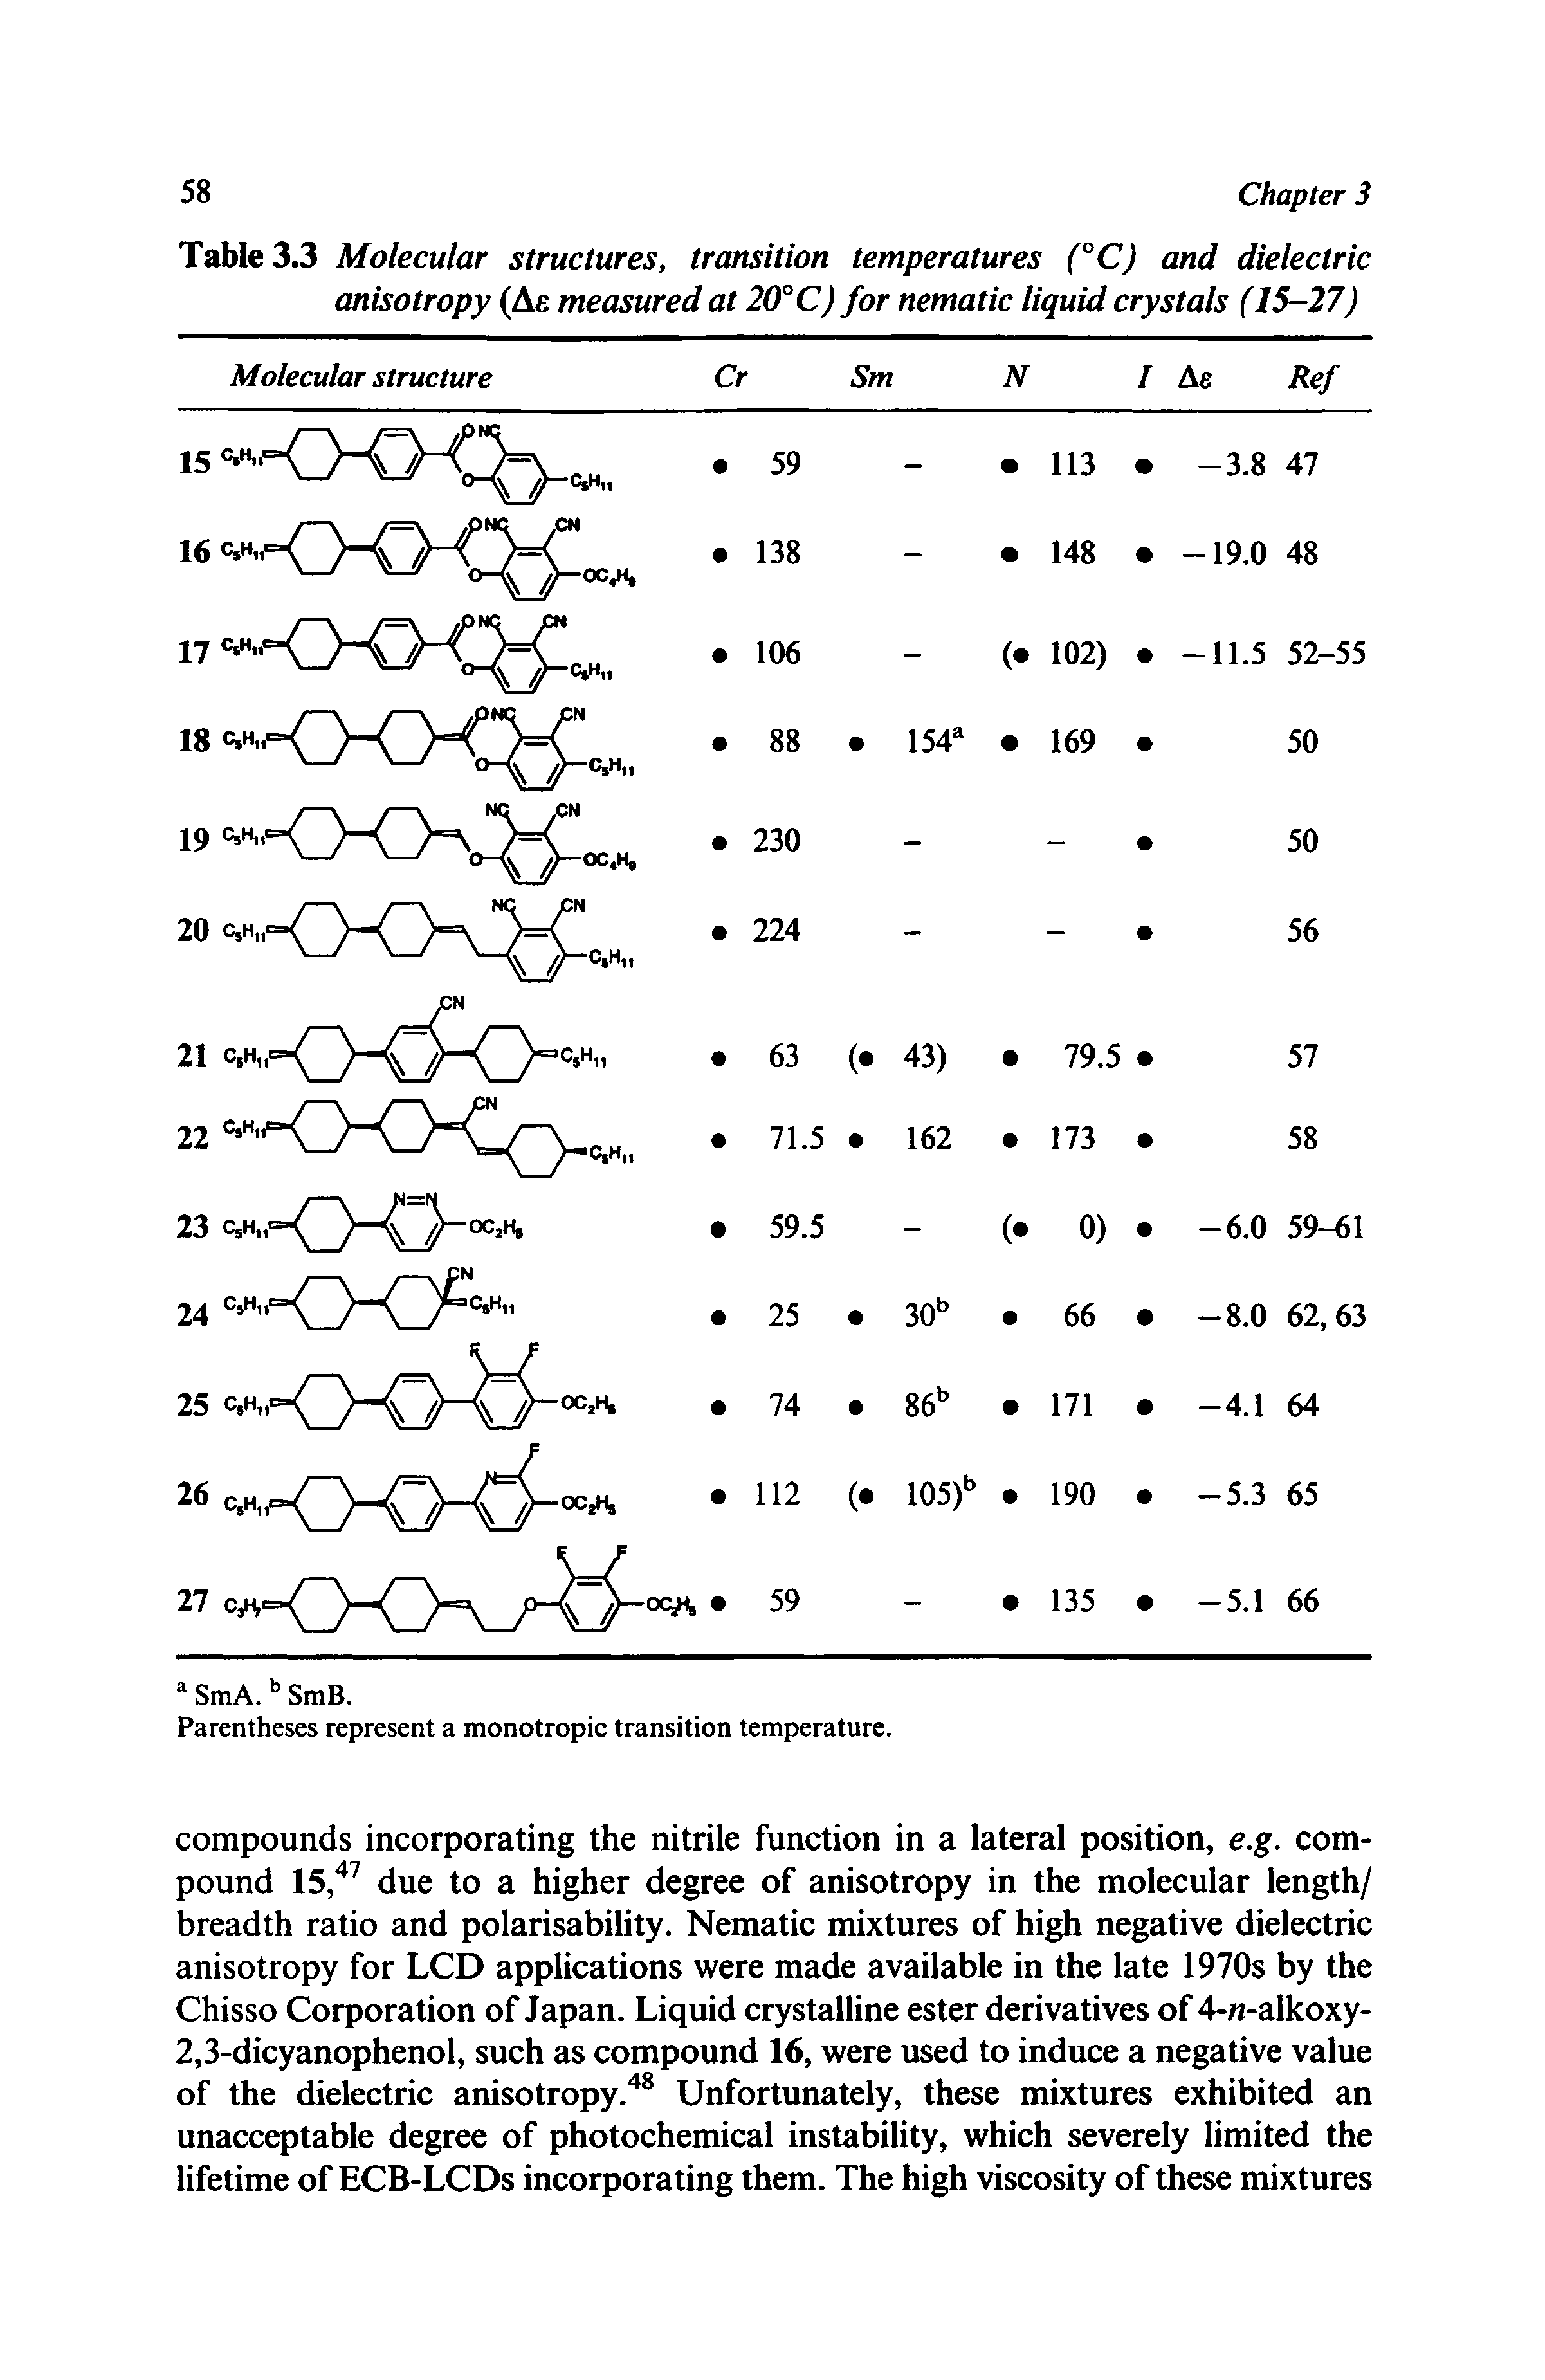 Table 3.3 Molecular structures, transition temperatures (°C) and dielectric anisotropy (Ae measured at 20°C) for nematic liquid crystals (15-27)...